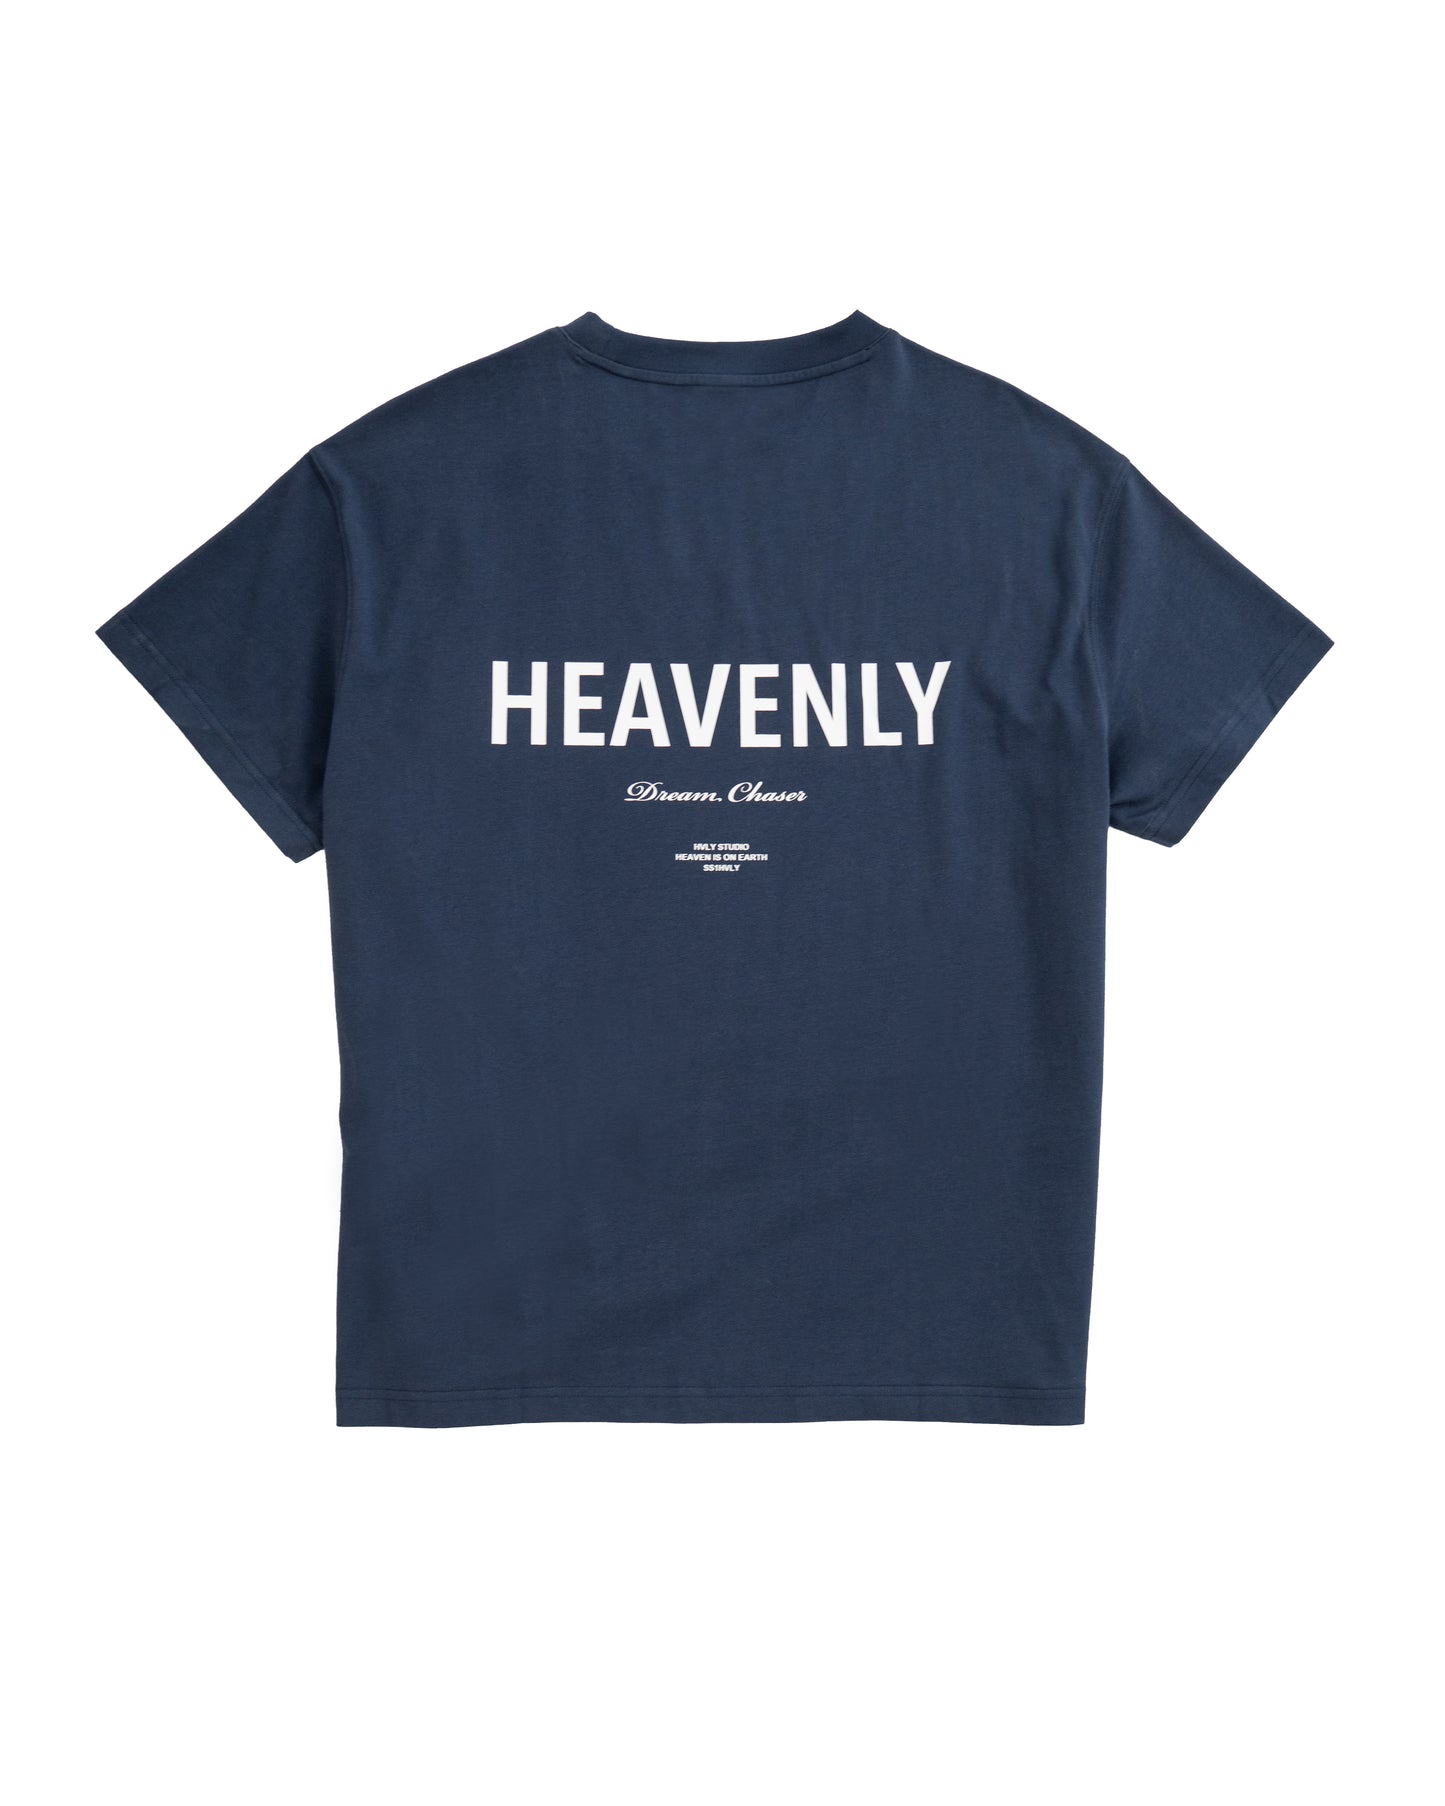 HVLY DREAM CHASERS T-SHIRT -NAVY BLUE